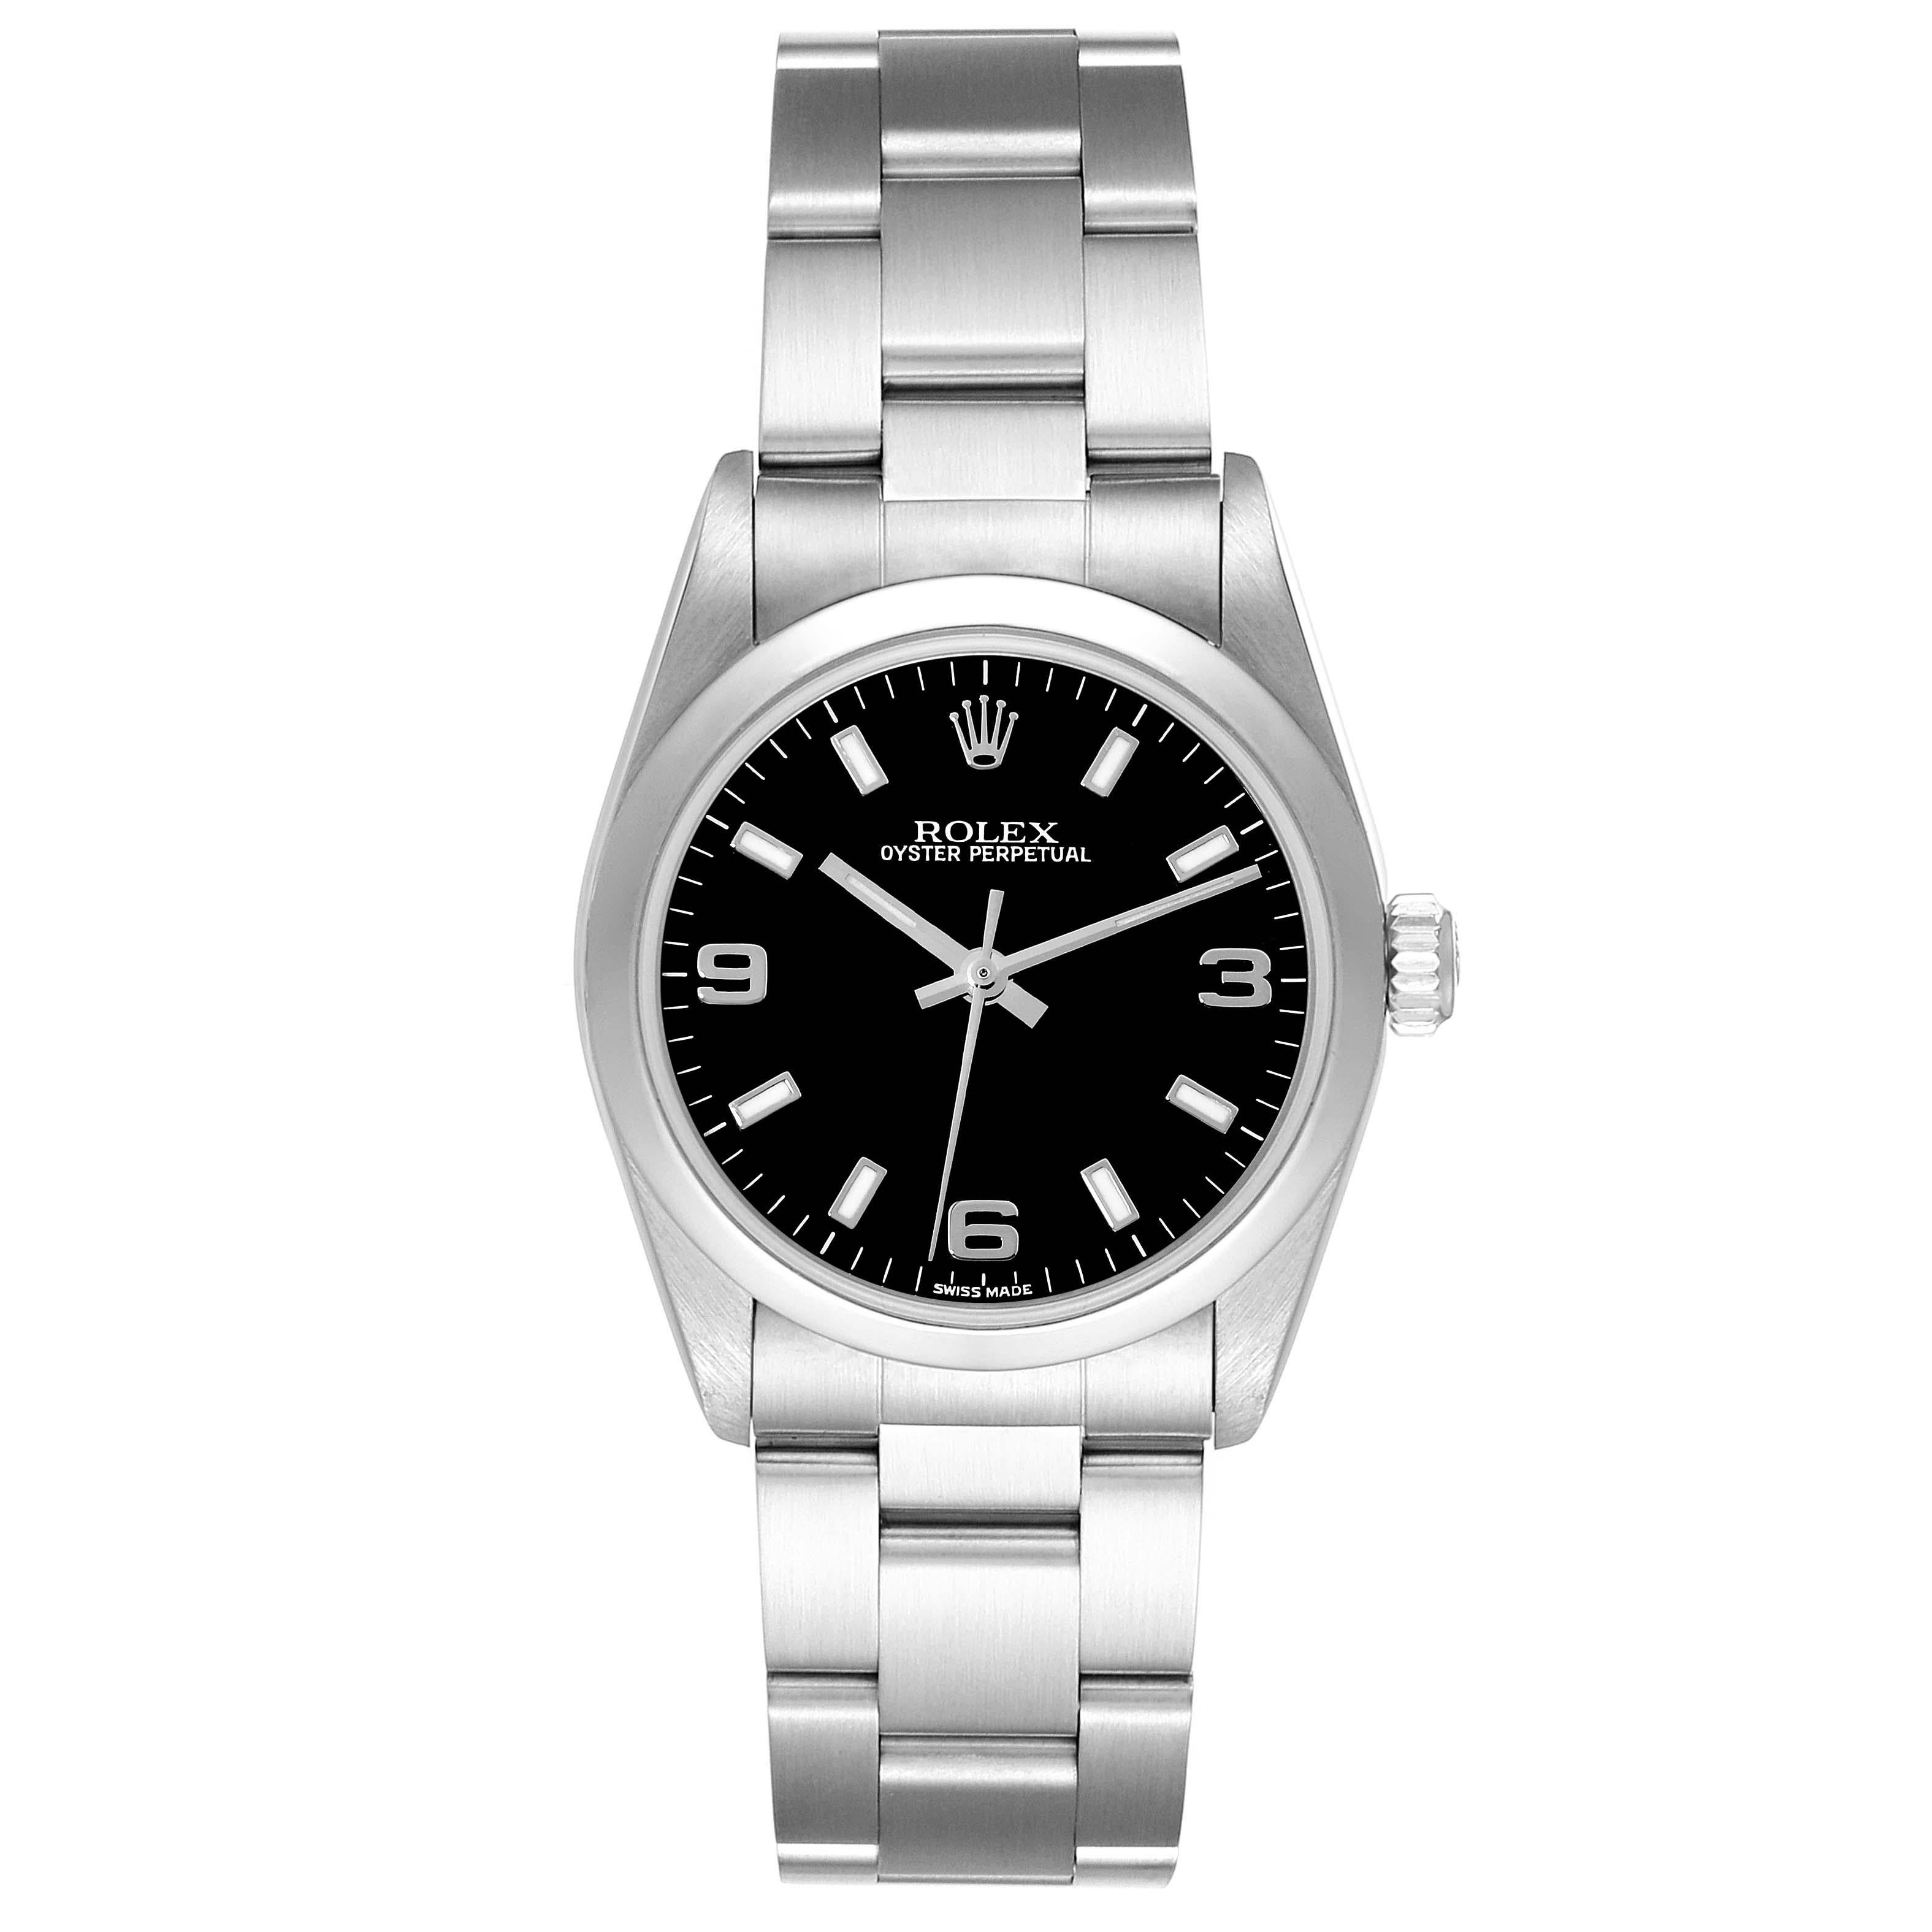 Rolex Oyster Perpetual Midsize Black Dial Steel Ladies Watch 77080. Officially certified chronometer automatic self-winding movement. Stainless steel oyster case 31.0 mm in diameter. Rolex logo on the crown. Stainless steel smooth bezel. Scratch